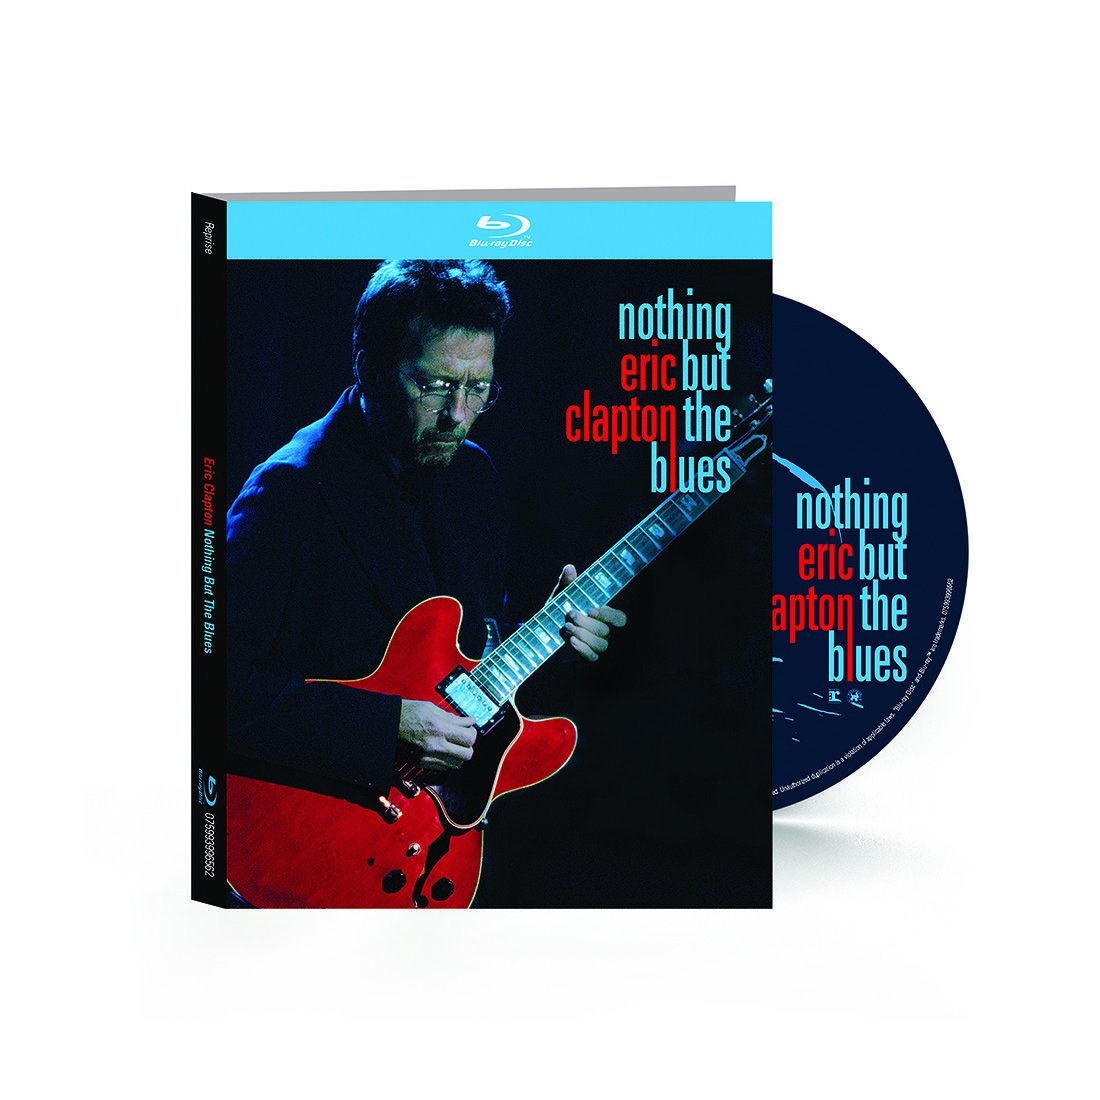 Eric Clapton, Eric Clapton: Nothing But the Blues BD, Blu-ray